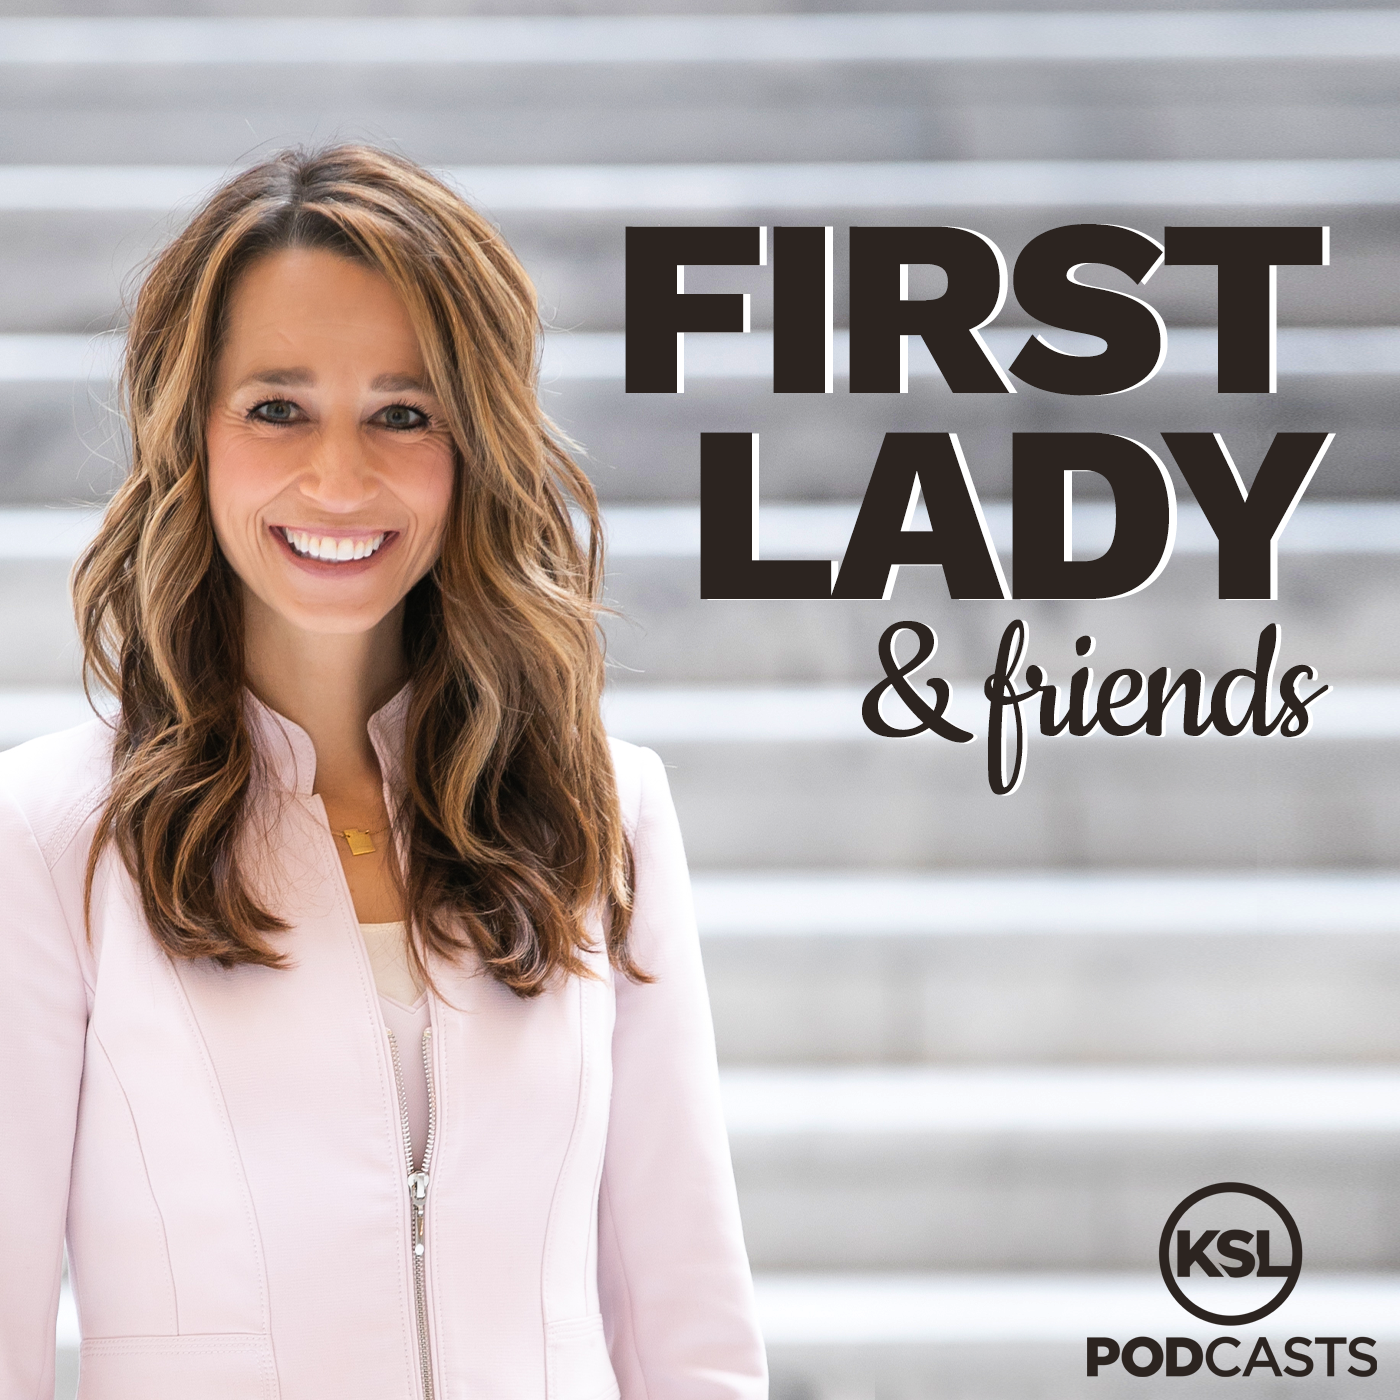 Introducing "First Lady and Friends"